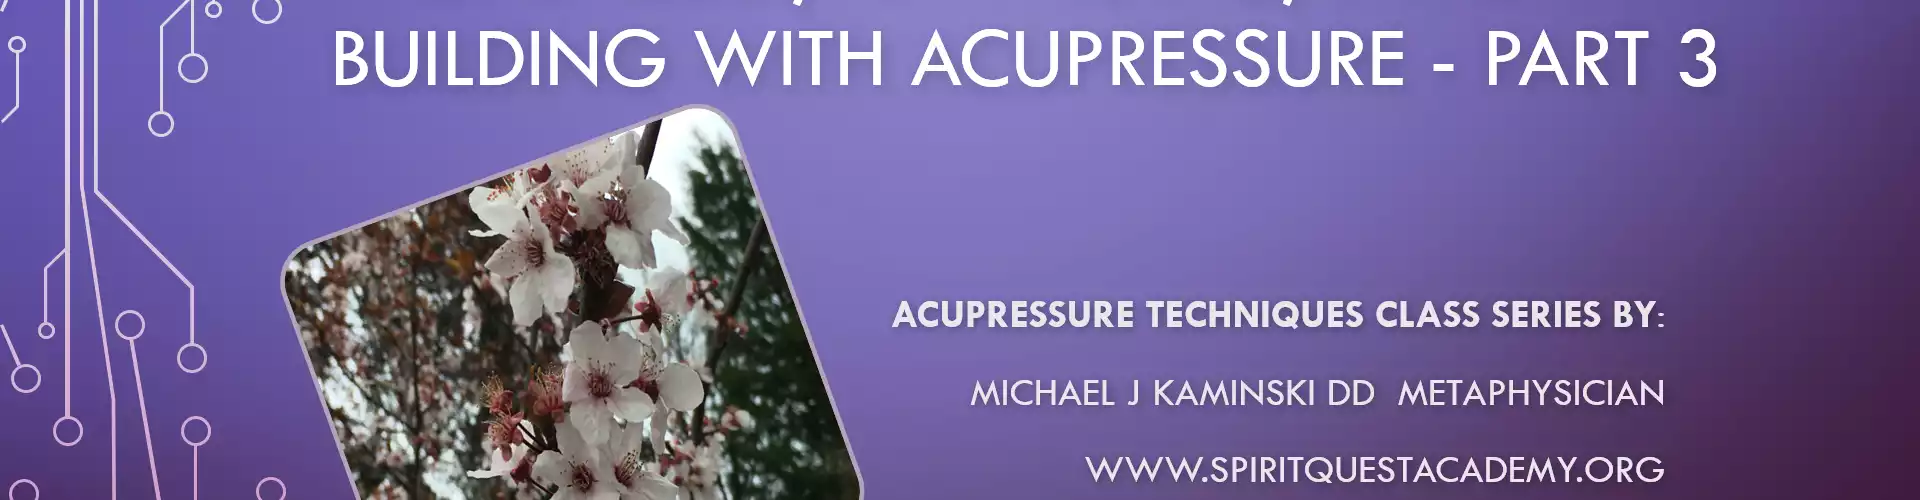 Facial Relief, Anti-Aging, Immunity Building with Acupressure - Part 3